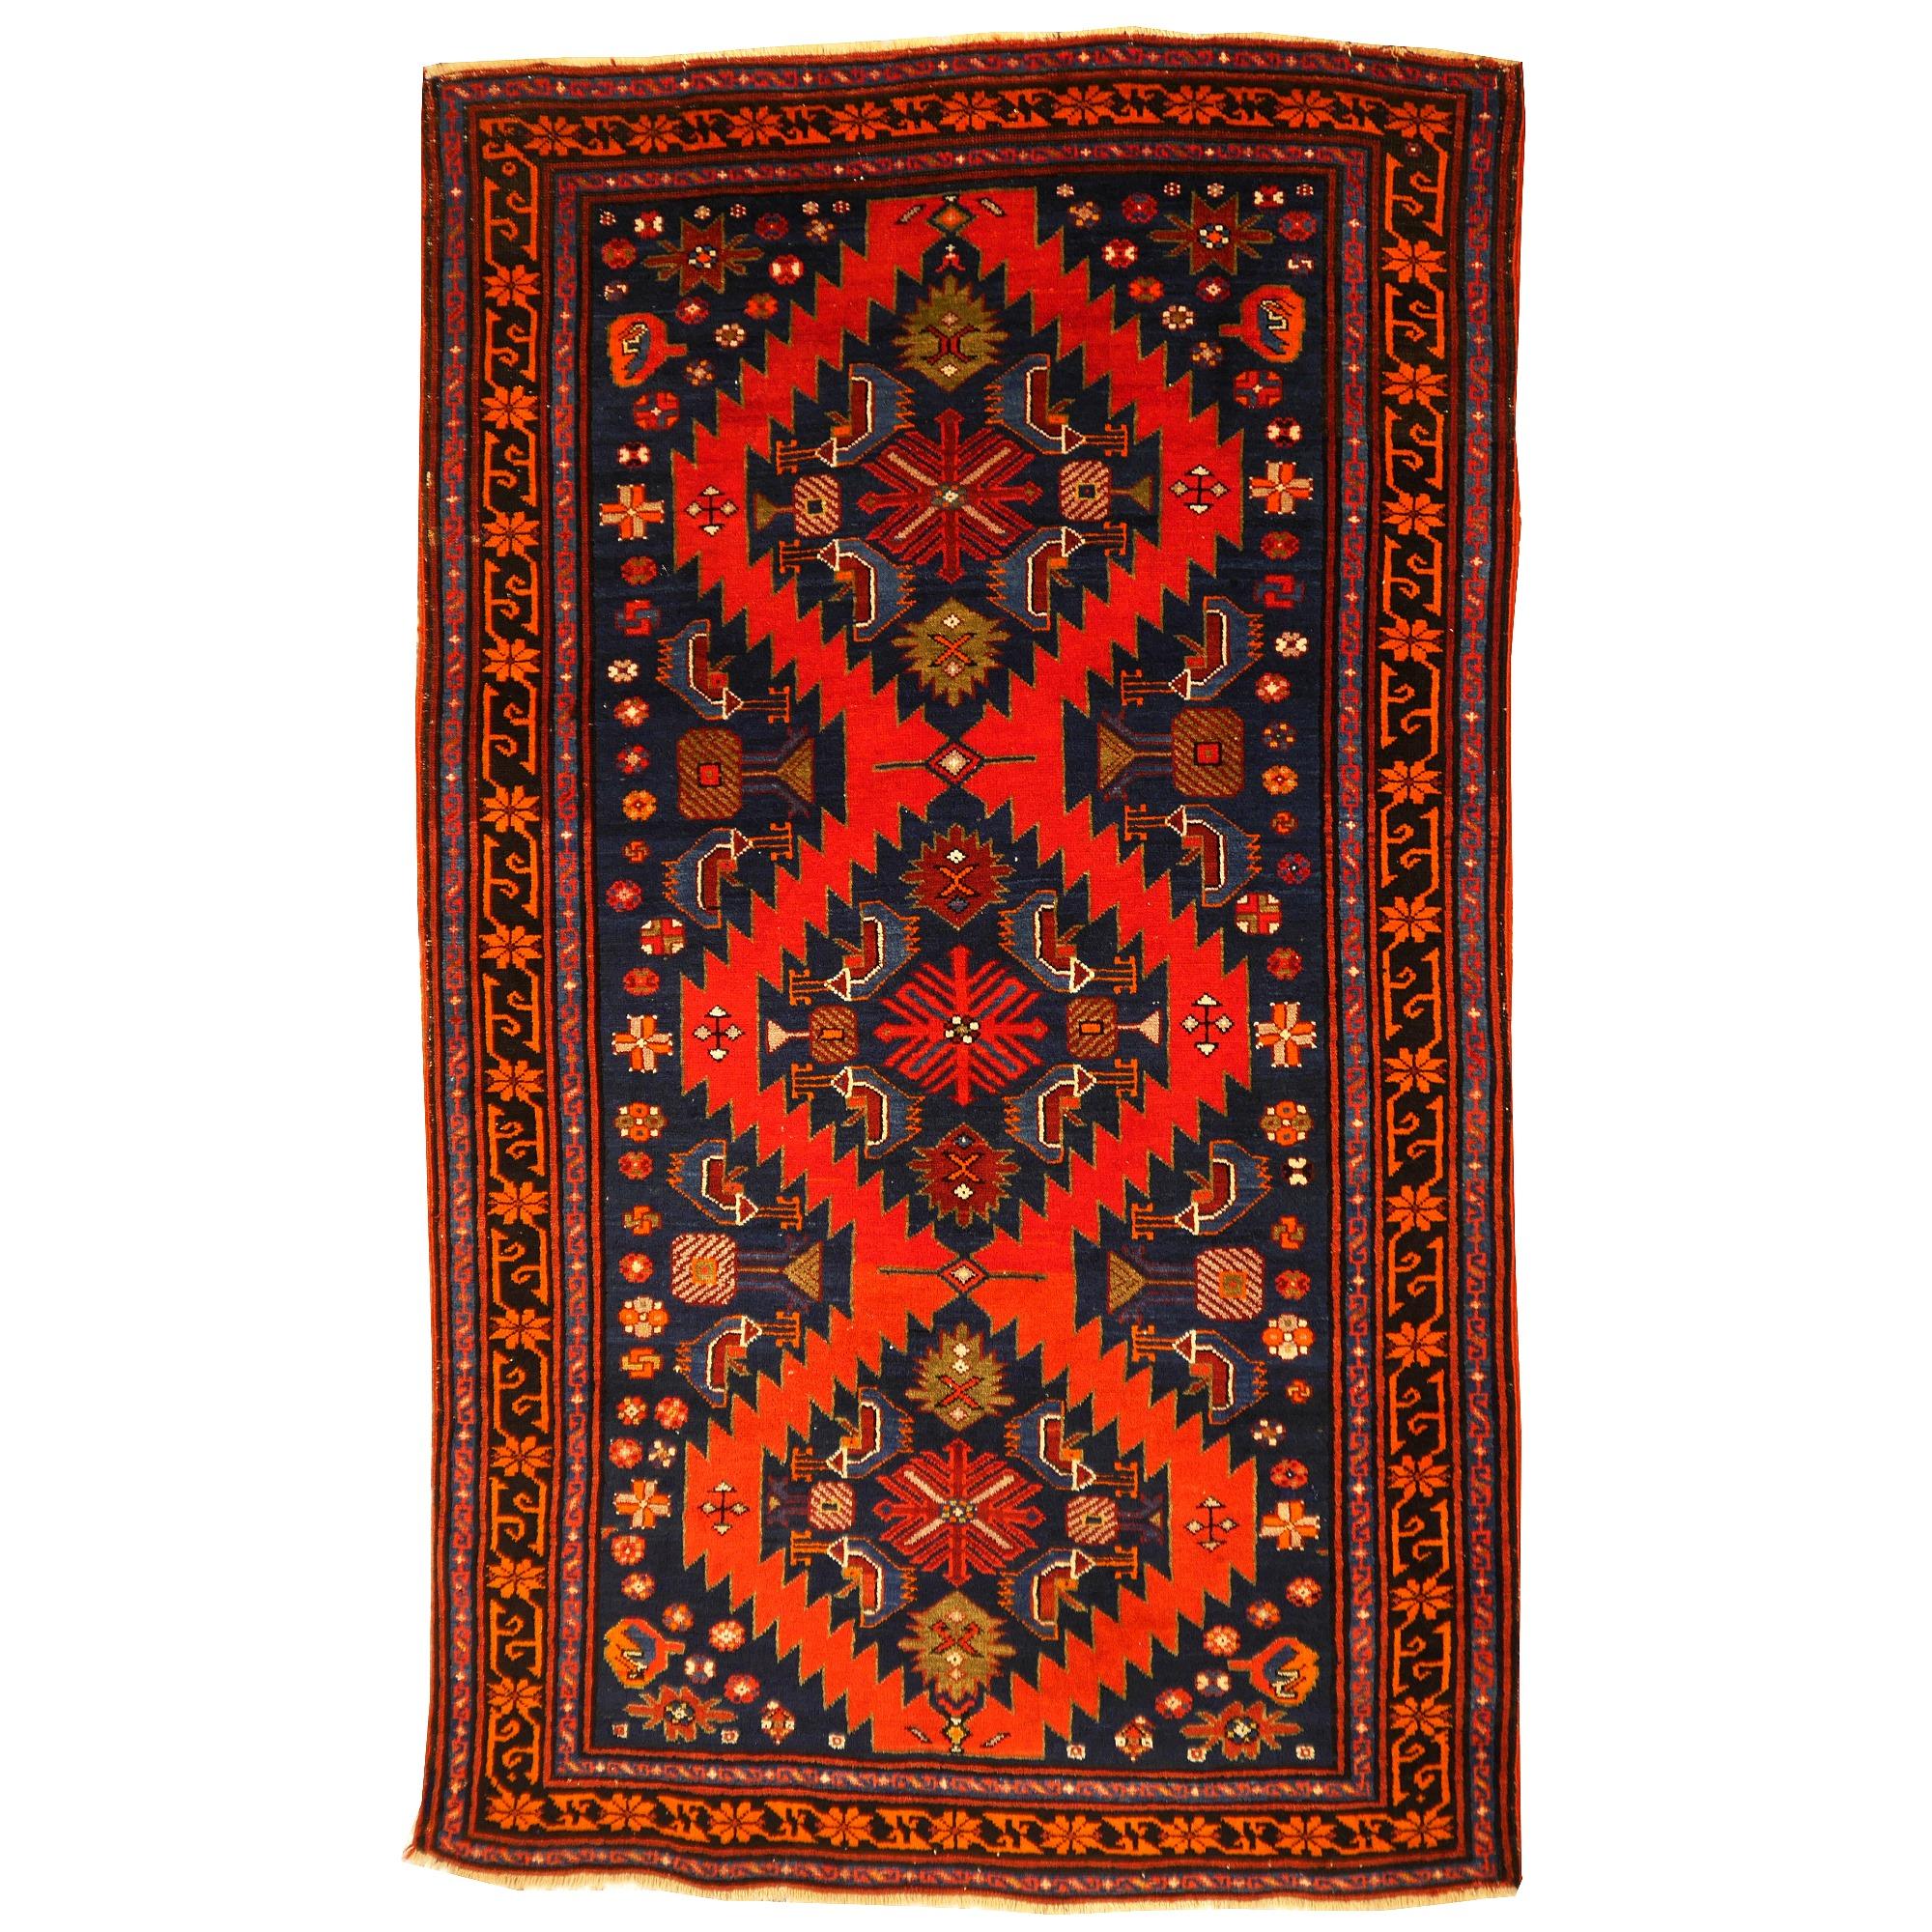 Karabagh Kazak rug Achma-Yumma karabagh antique
STUNNING RUG WITH VIBRANT COLORS  - BEAUTIFUL INTERIOR DESIGN RUG.
THIS BEAUTIFUL MEDIUM SIZE KAZAK RUG WAS KNOTTED USING FINE WOOL AND NATURAL DYES. THIS GIVES THE CARPET A DECORATIVE LOOK. 
Design: